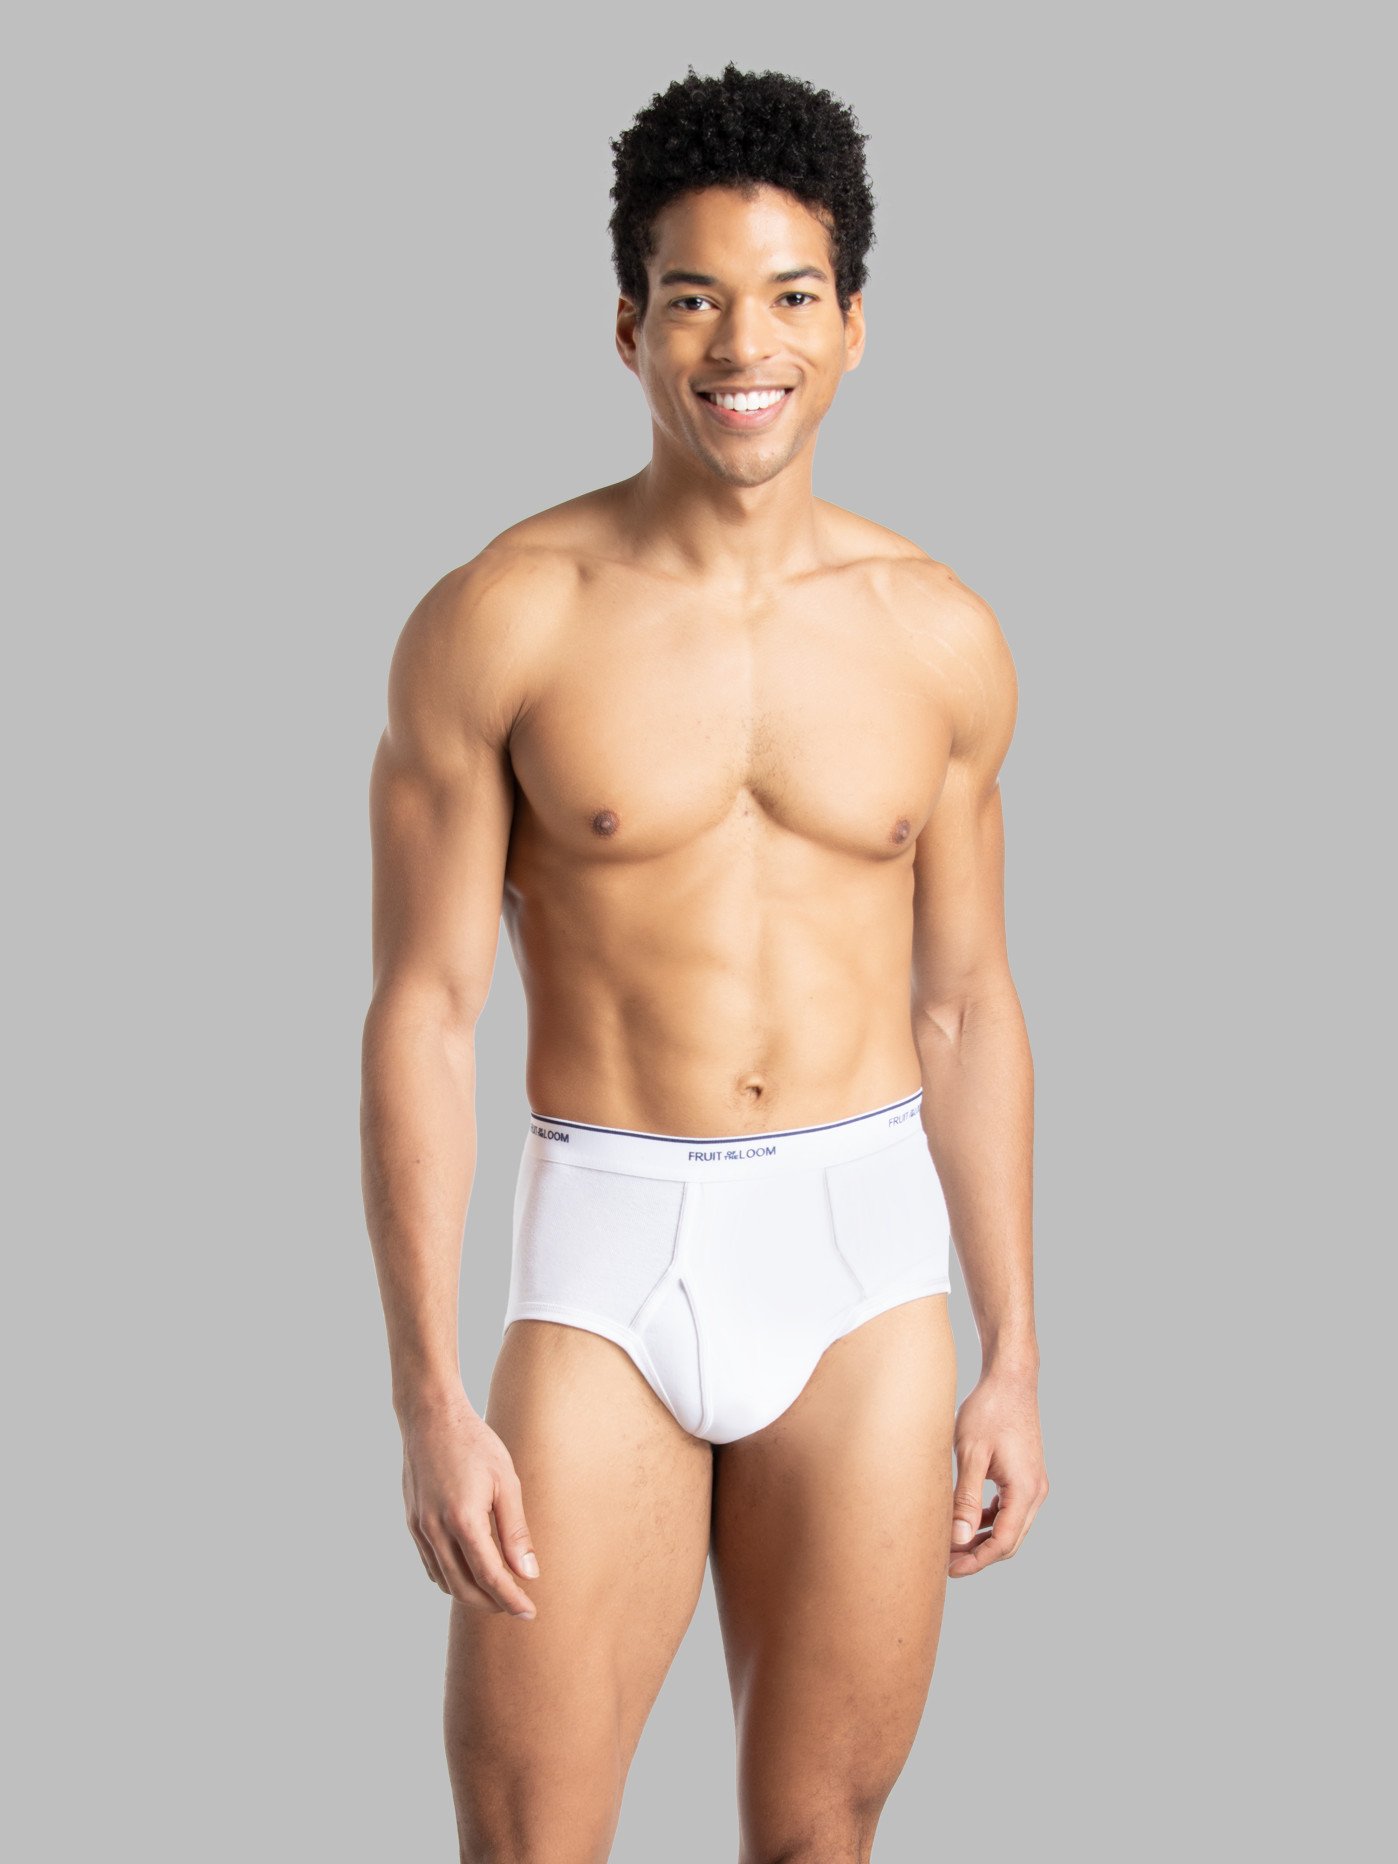 72 Pieces Men's Fruit Of The Loom White Briefs,size 3xl - Mens Underwear -  at 